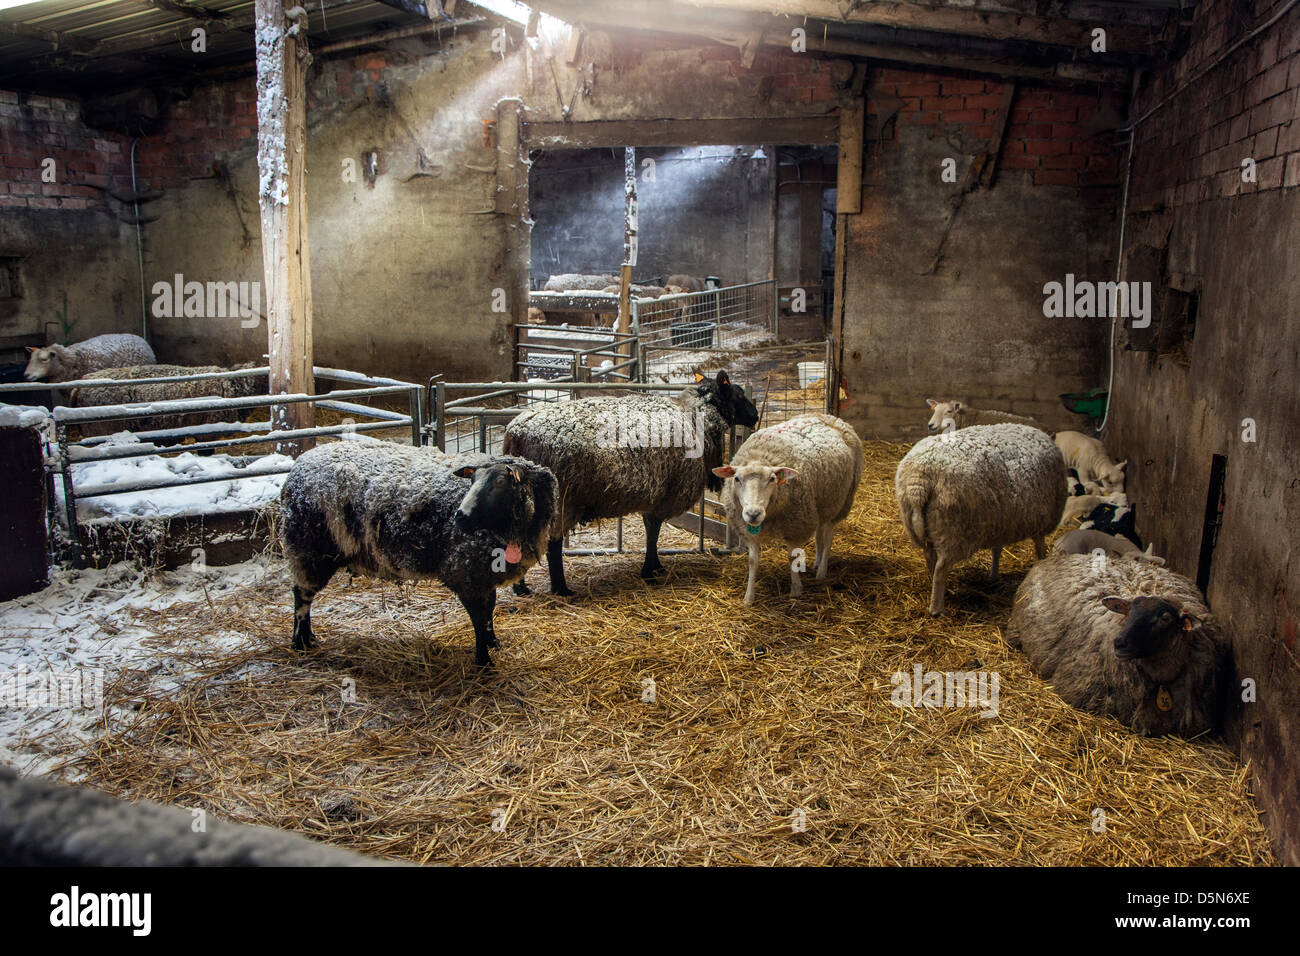 Domestic sheep, ewes and lambs in barn / sheepfold at farm in winter Stock Photo